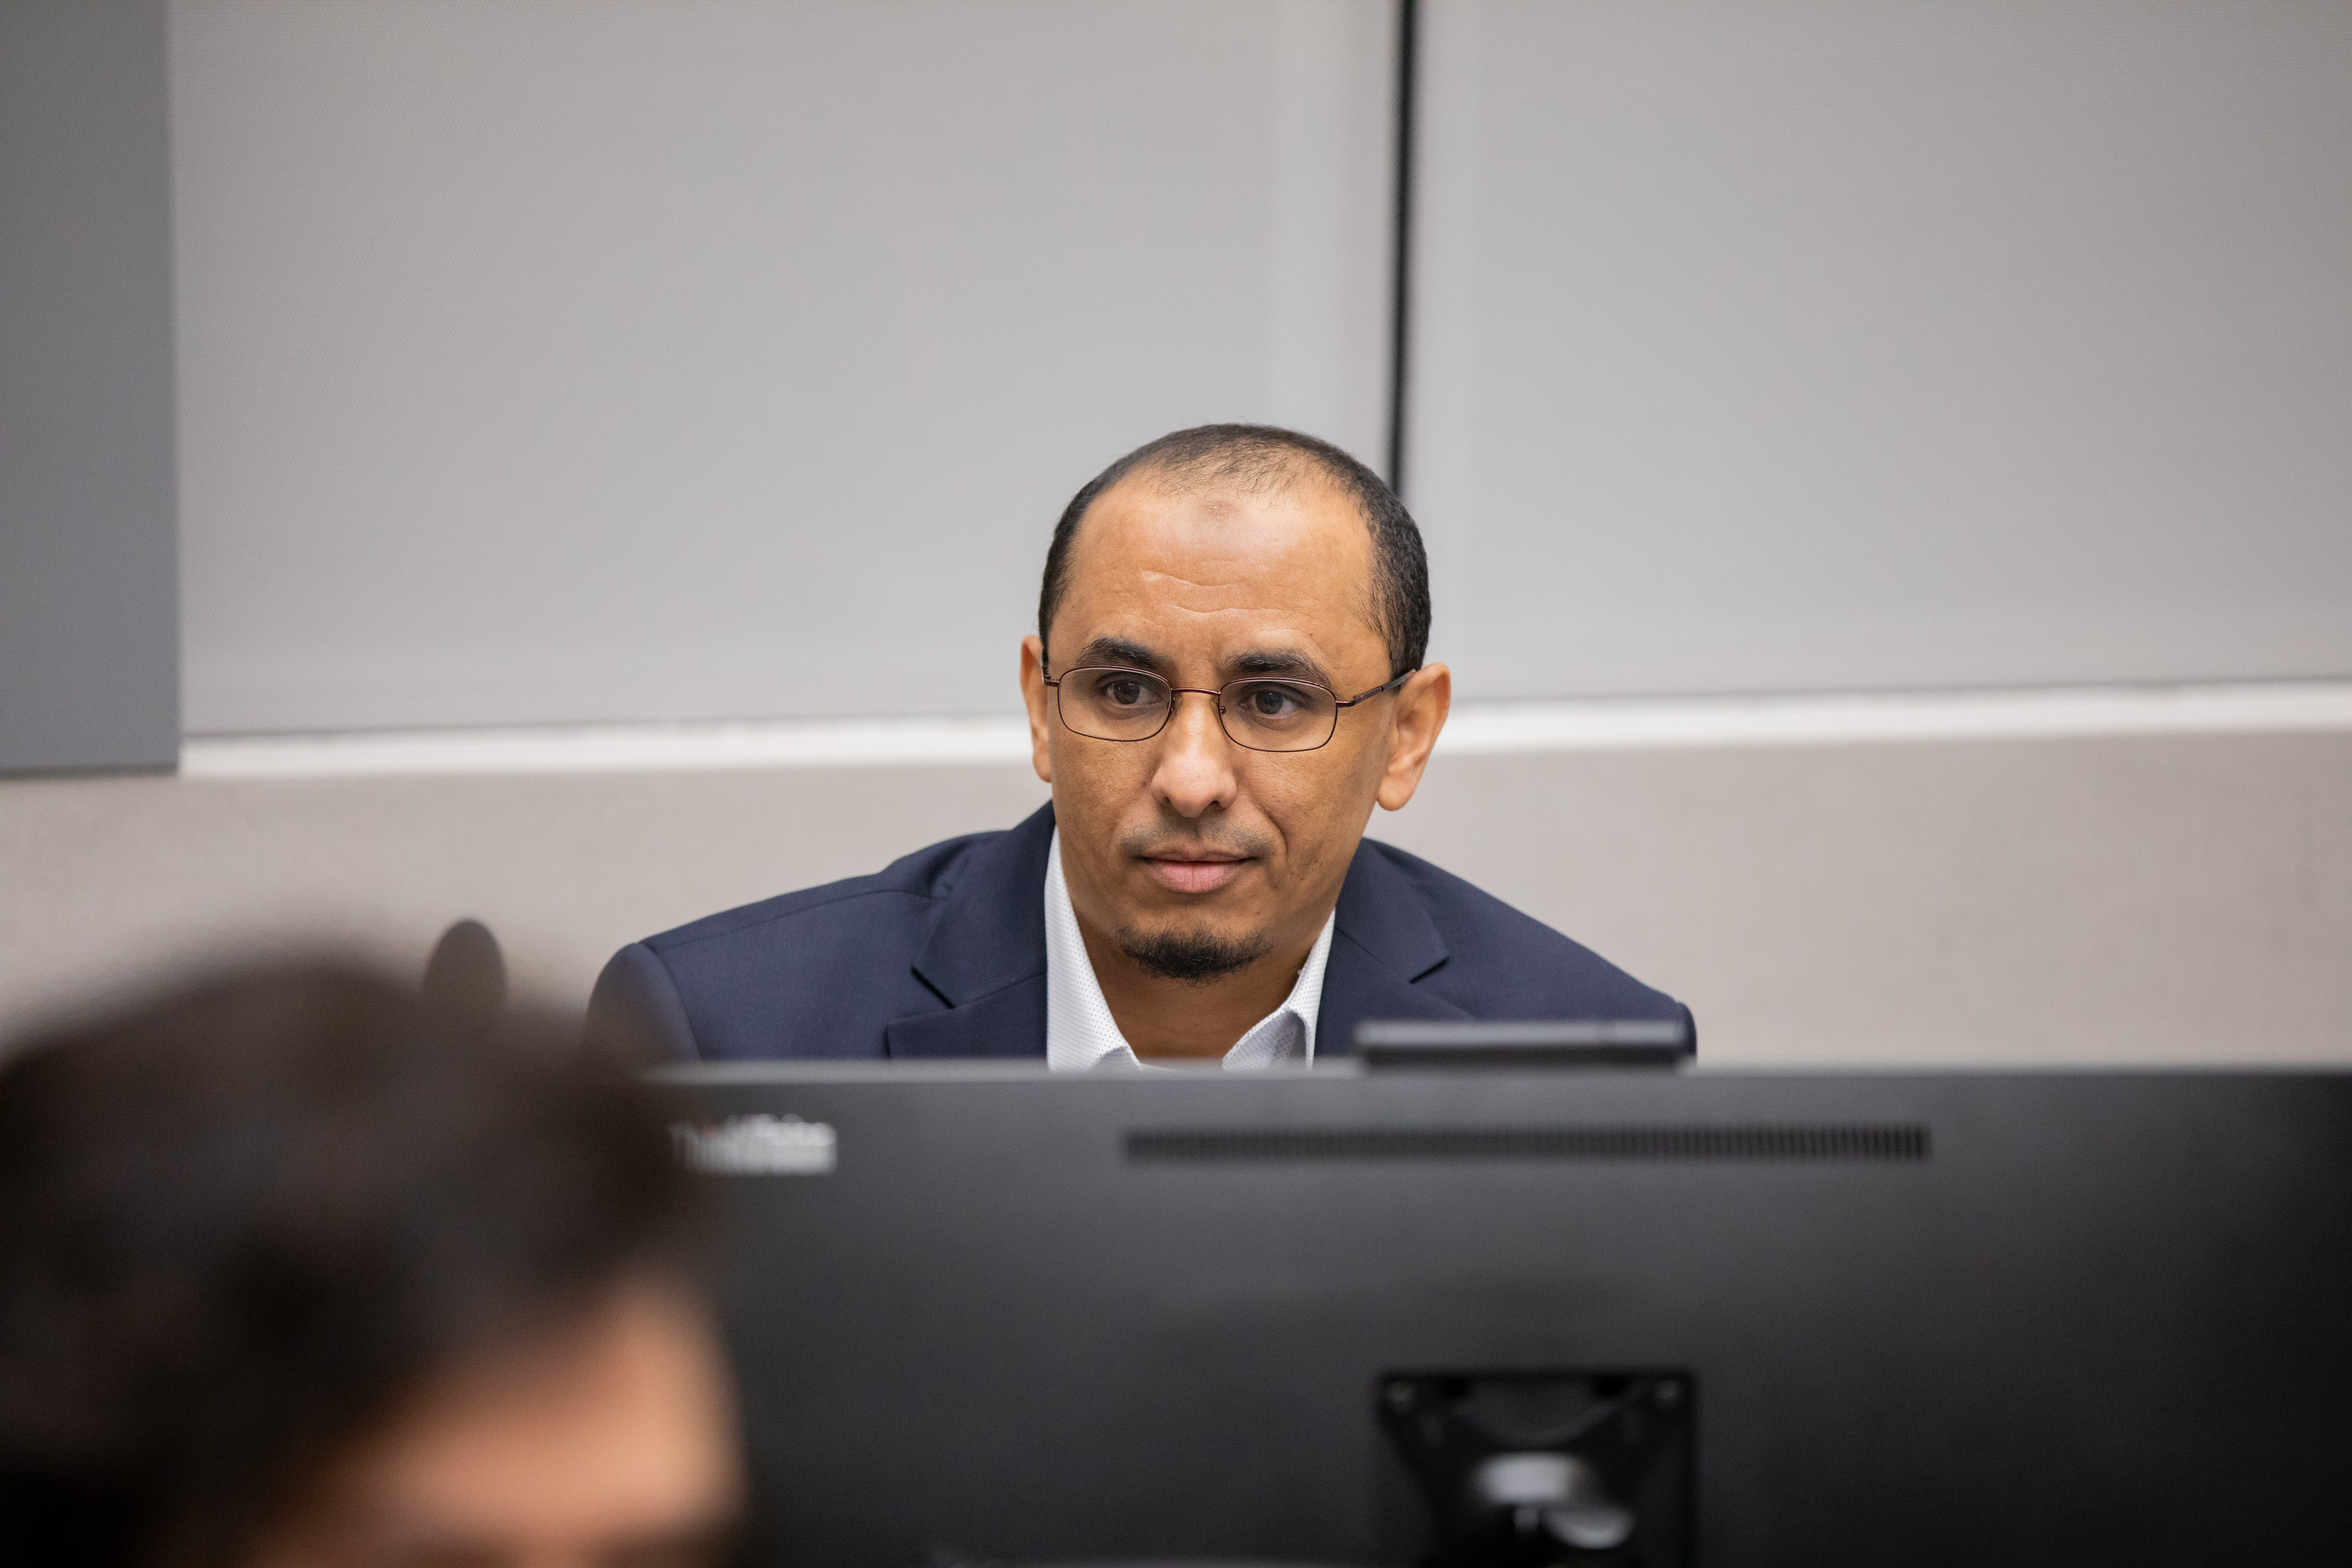 Mr Al Hassan Ag Abdoul Aziz Ag Mohamed Ag Mahmoud in Courtroom I of the International Criminal Court in The Hague (Netherlands) on 19 February 2020 © ICC-CPI